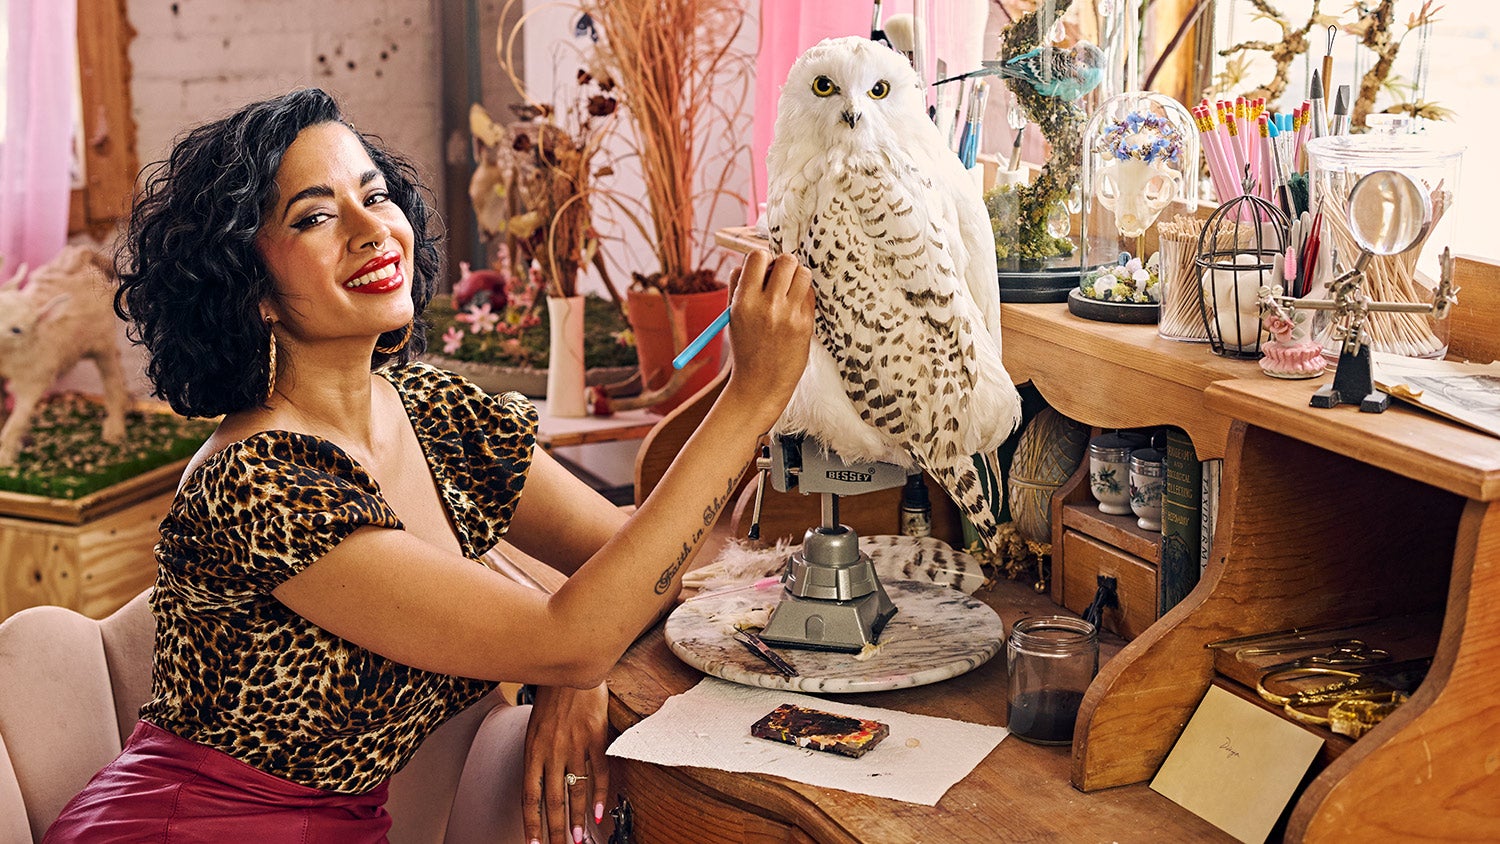 Divya Anantharaman sits at desk, works on replica snowy owl mount, with other taxidermied animals and materials in background